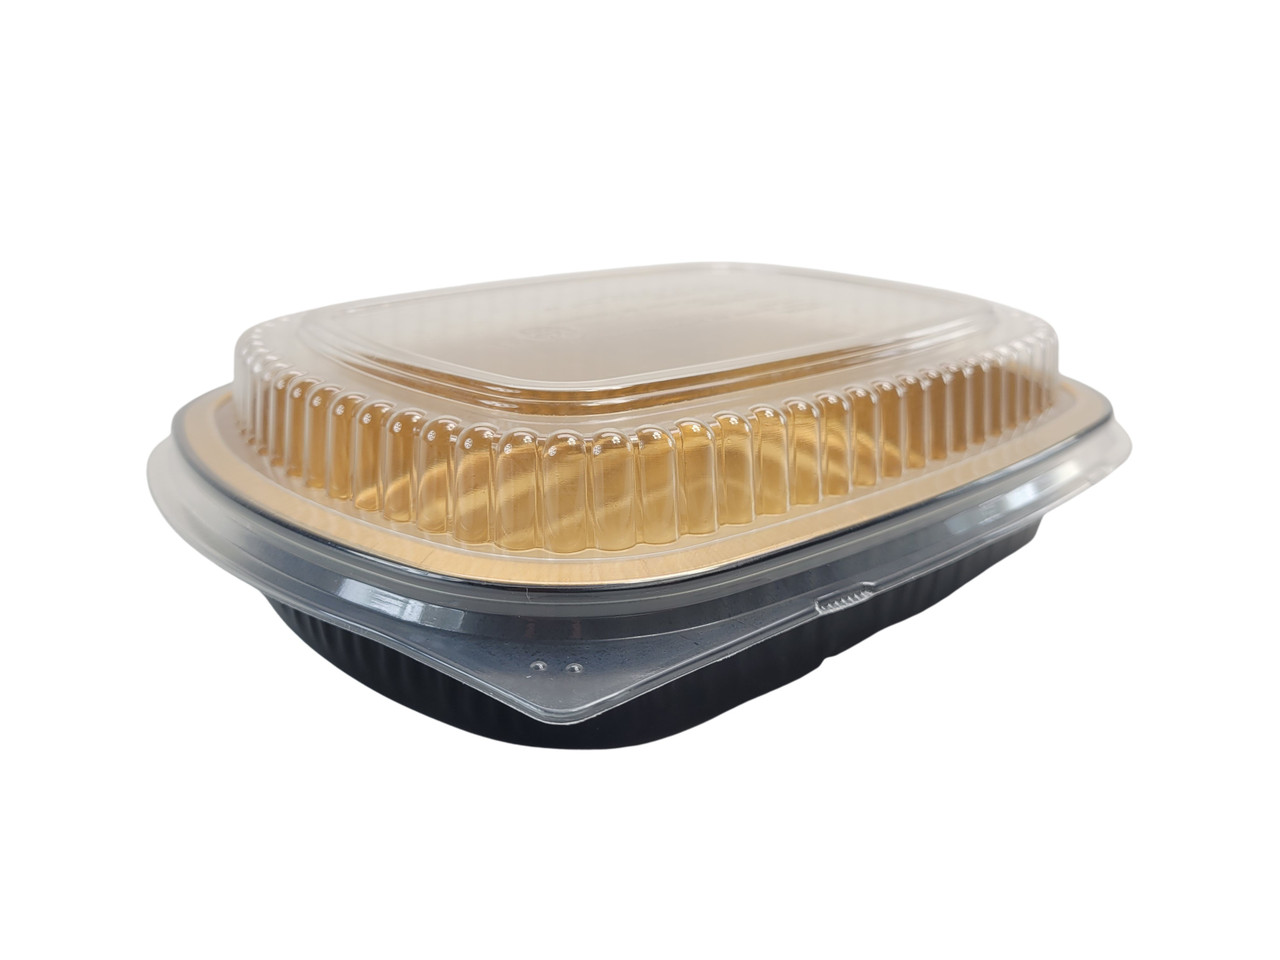 11.25 X 8.88 X 2.16 Aluminum Carry-Out Container, Black And Gold Base  With Clear Dome, 50 Ct.